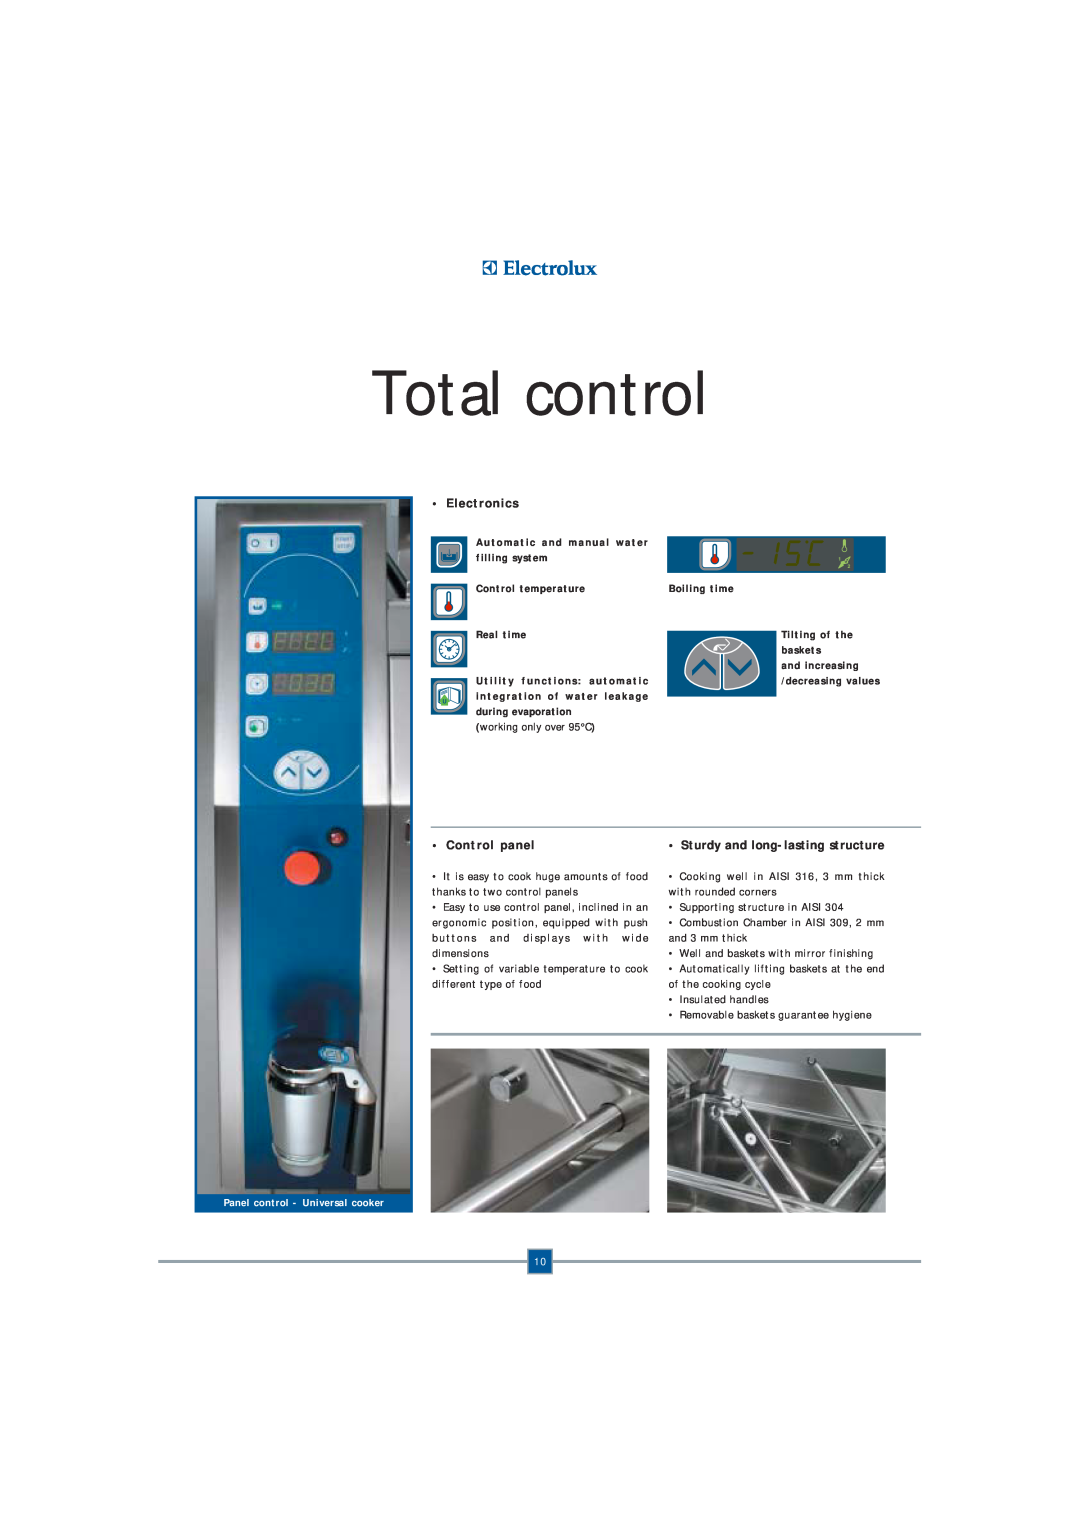 Electrolux Fryer Total control, Electronics, Control panel, Automatic and manual water, filling system, Boiling time 